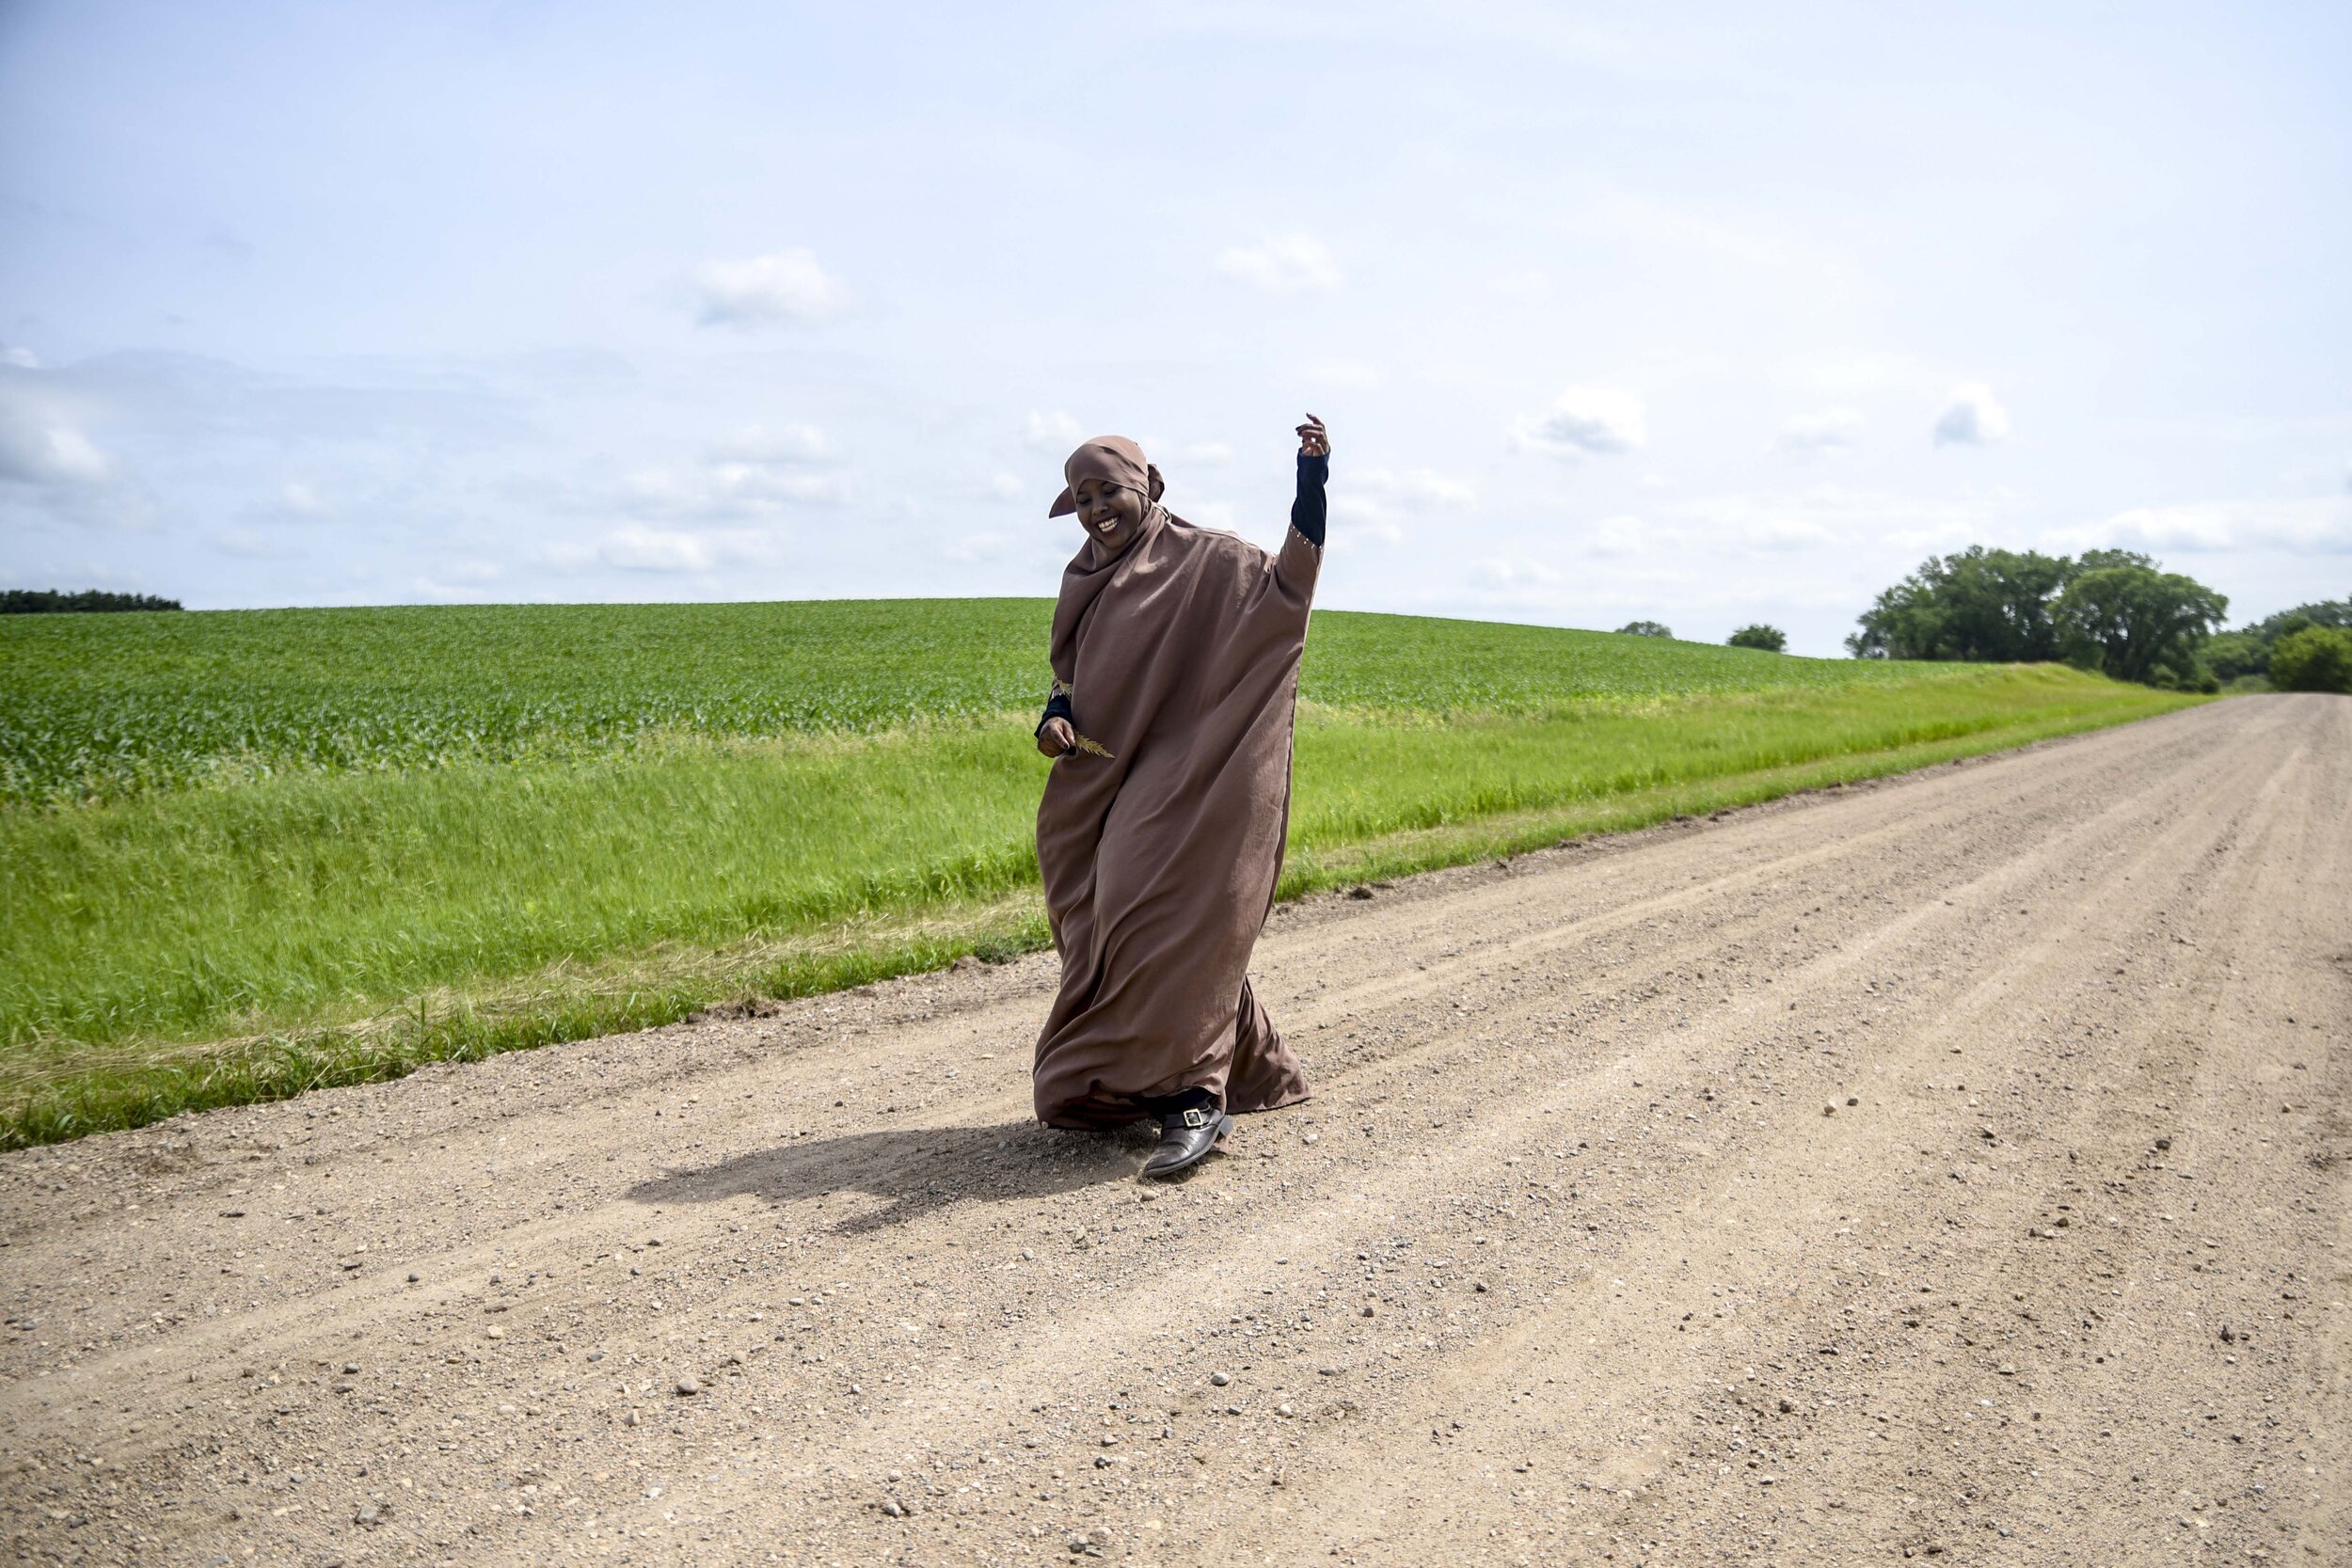  Kosar laughs while walking down a country road in Colfax Township June 29, 2019. “This is just what home looks like.,” she said. 